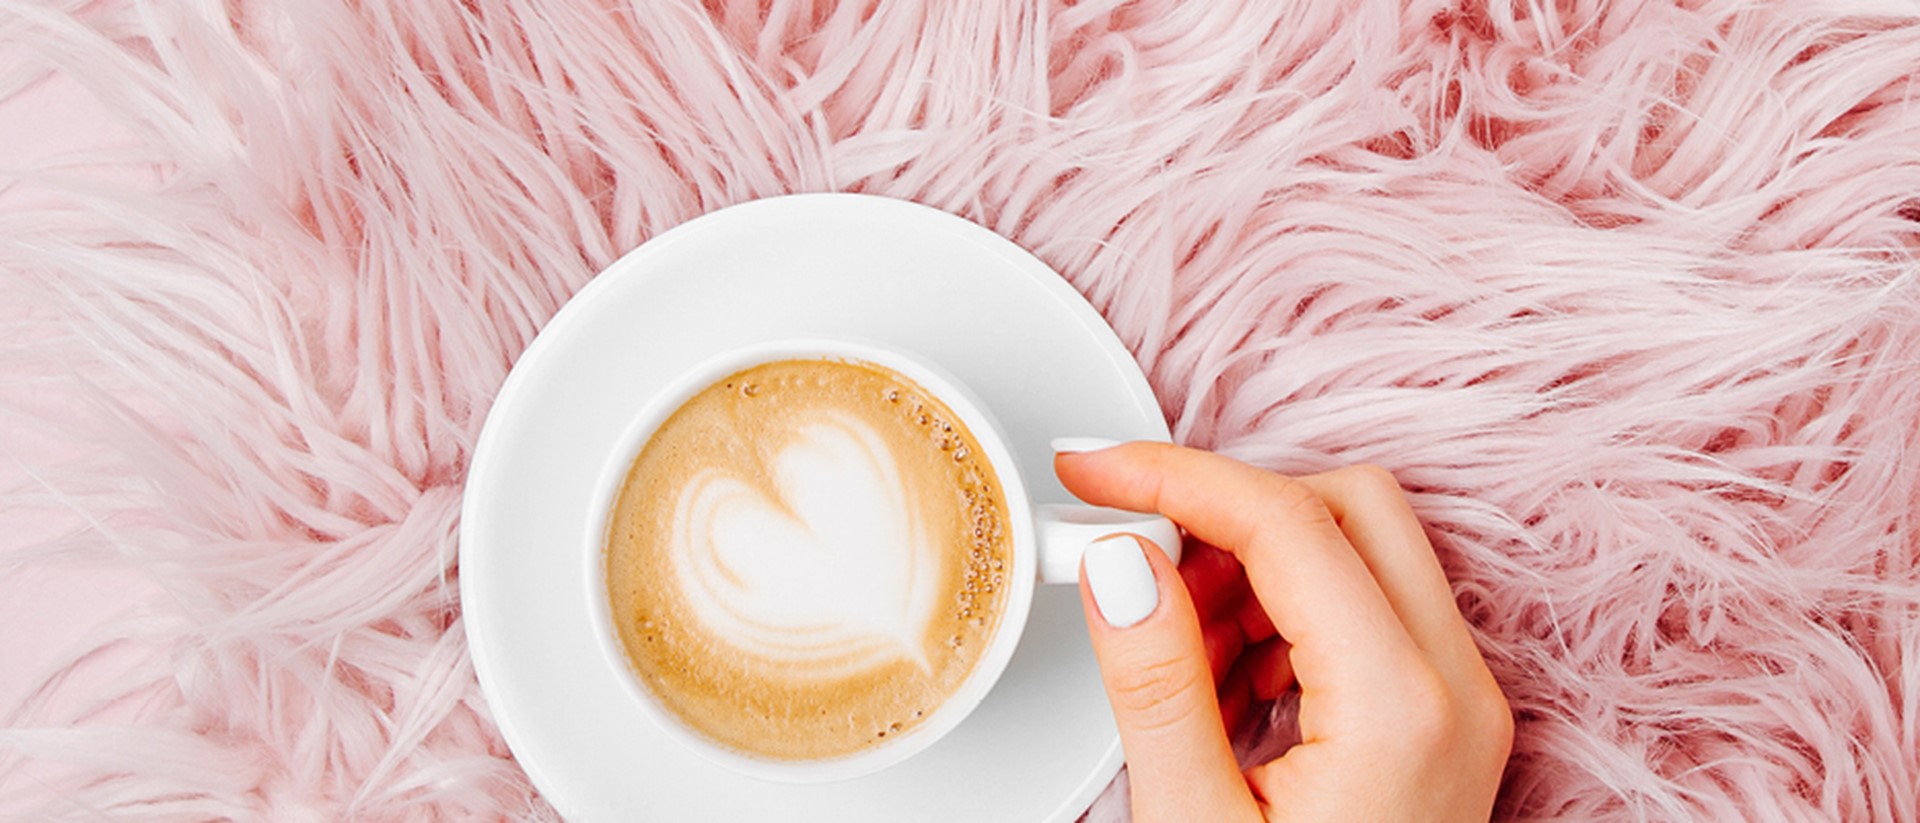 Top down image of fresh mug of coffee on a fluffy pink background